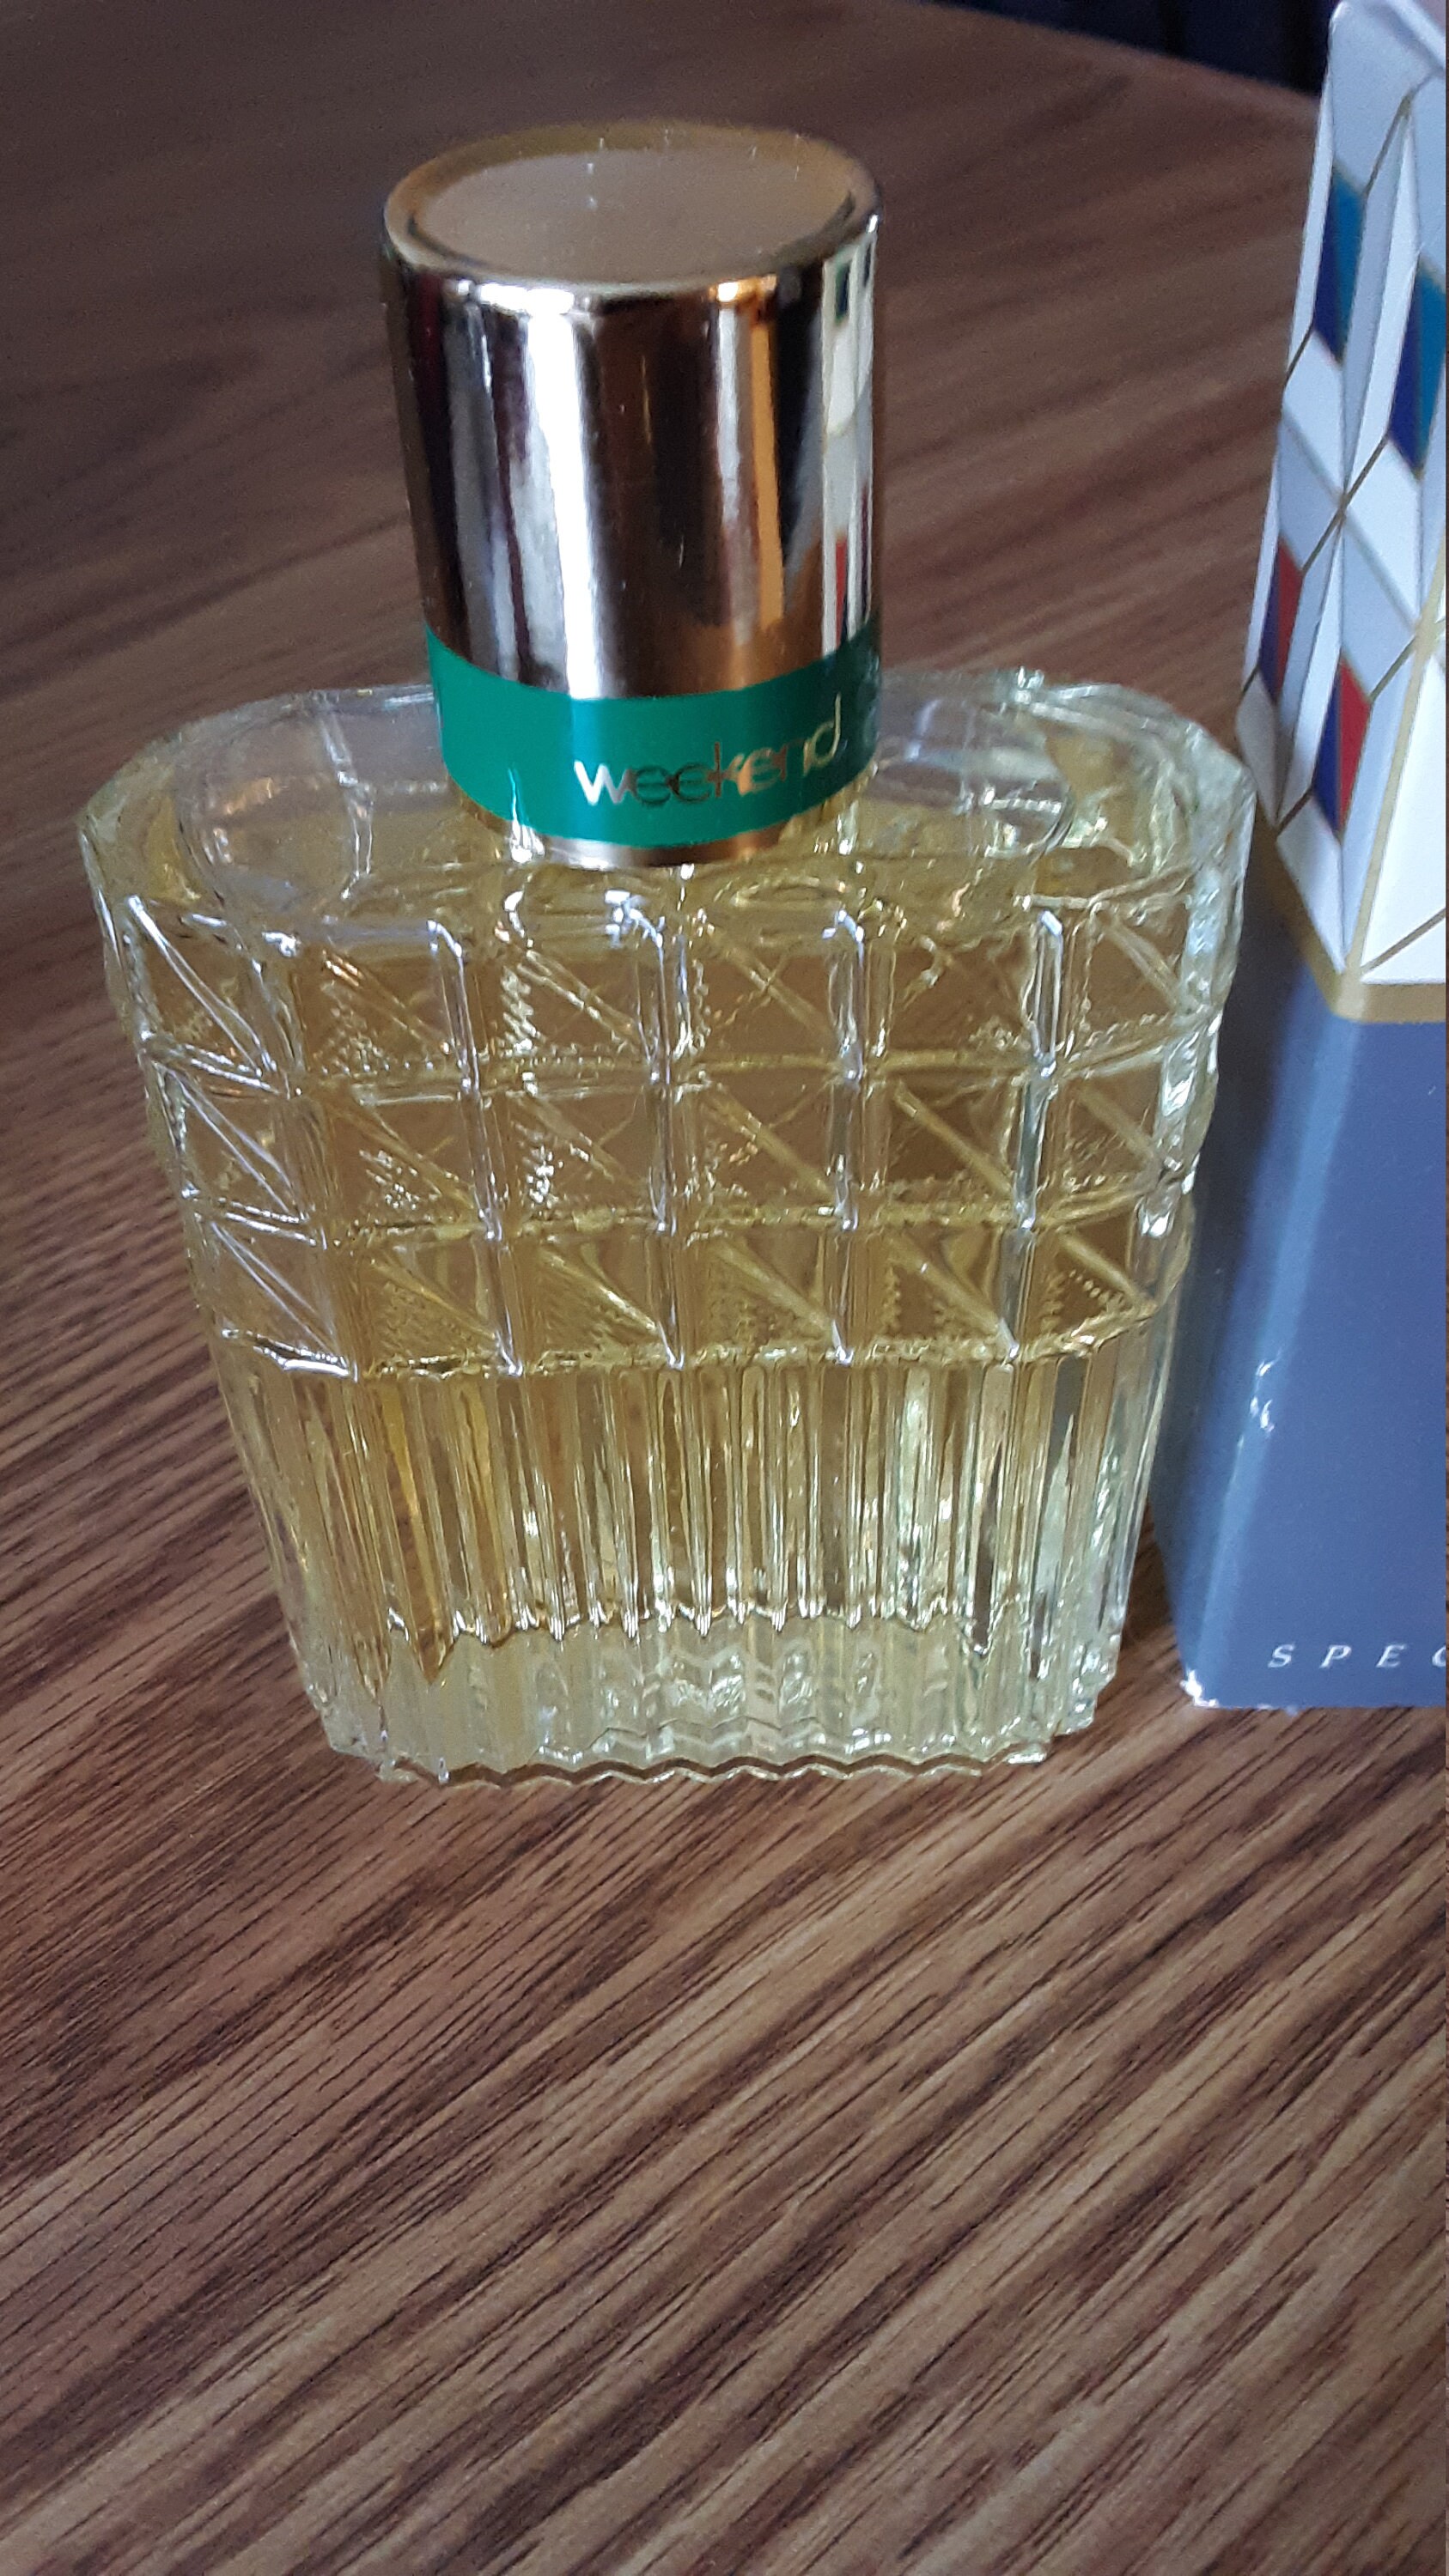 Avon WEEKEND Cologne Special Edition 3.25 Fl Oz. FULL Mint in - Etsy